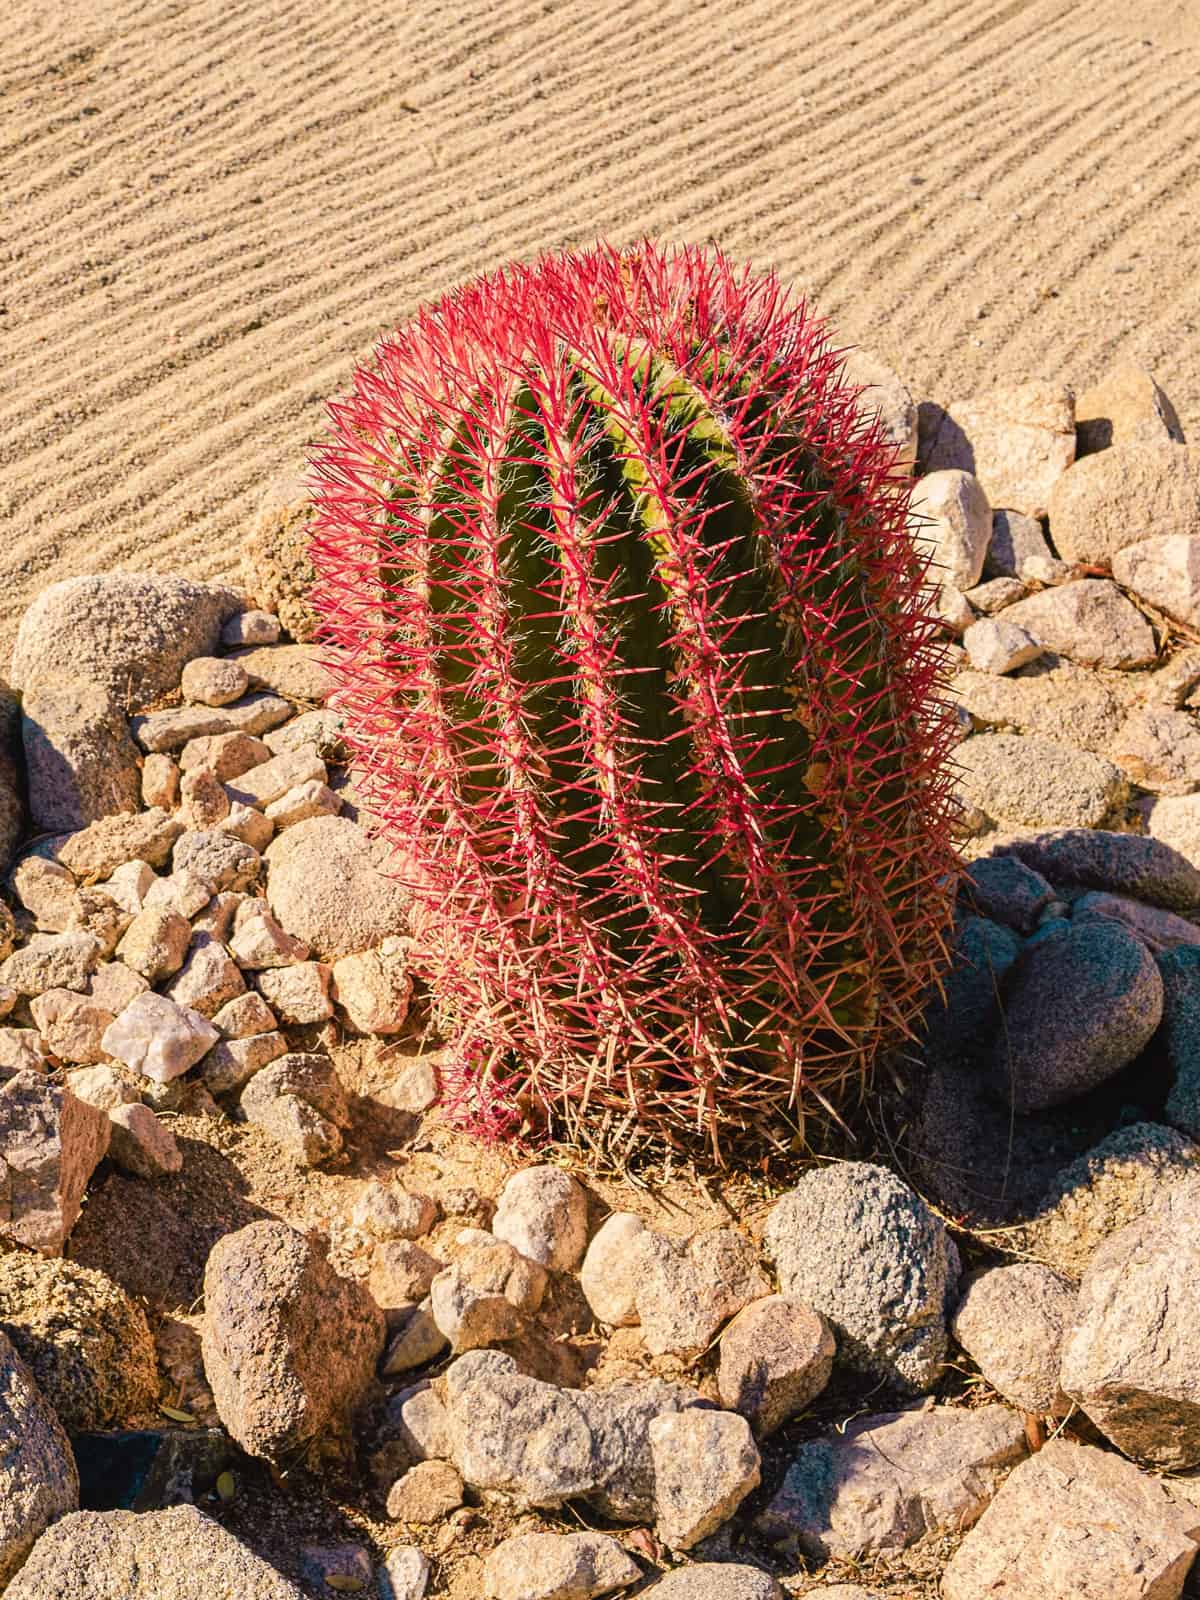 A small Fire Barrel Cactus surrounded by rocks 